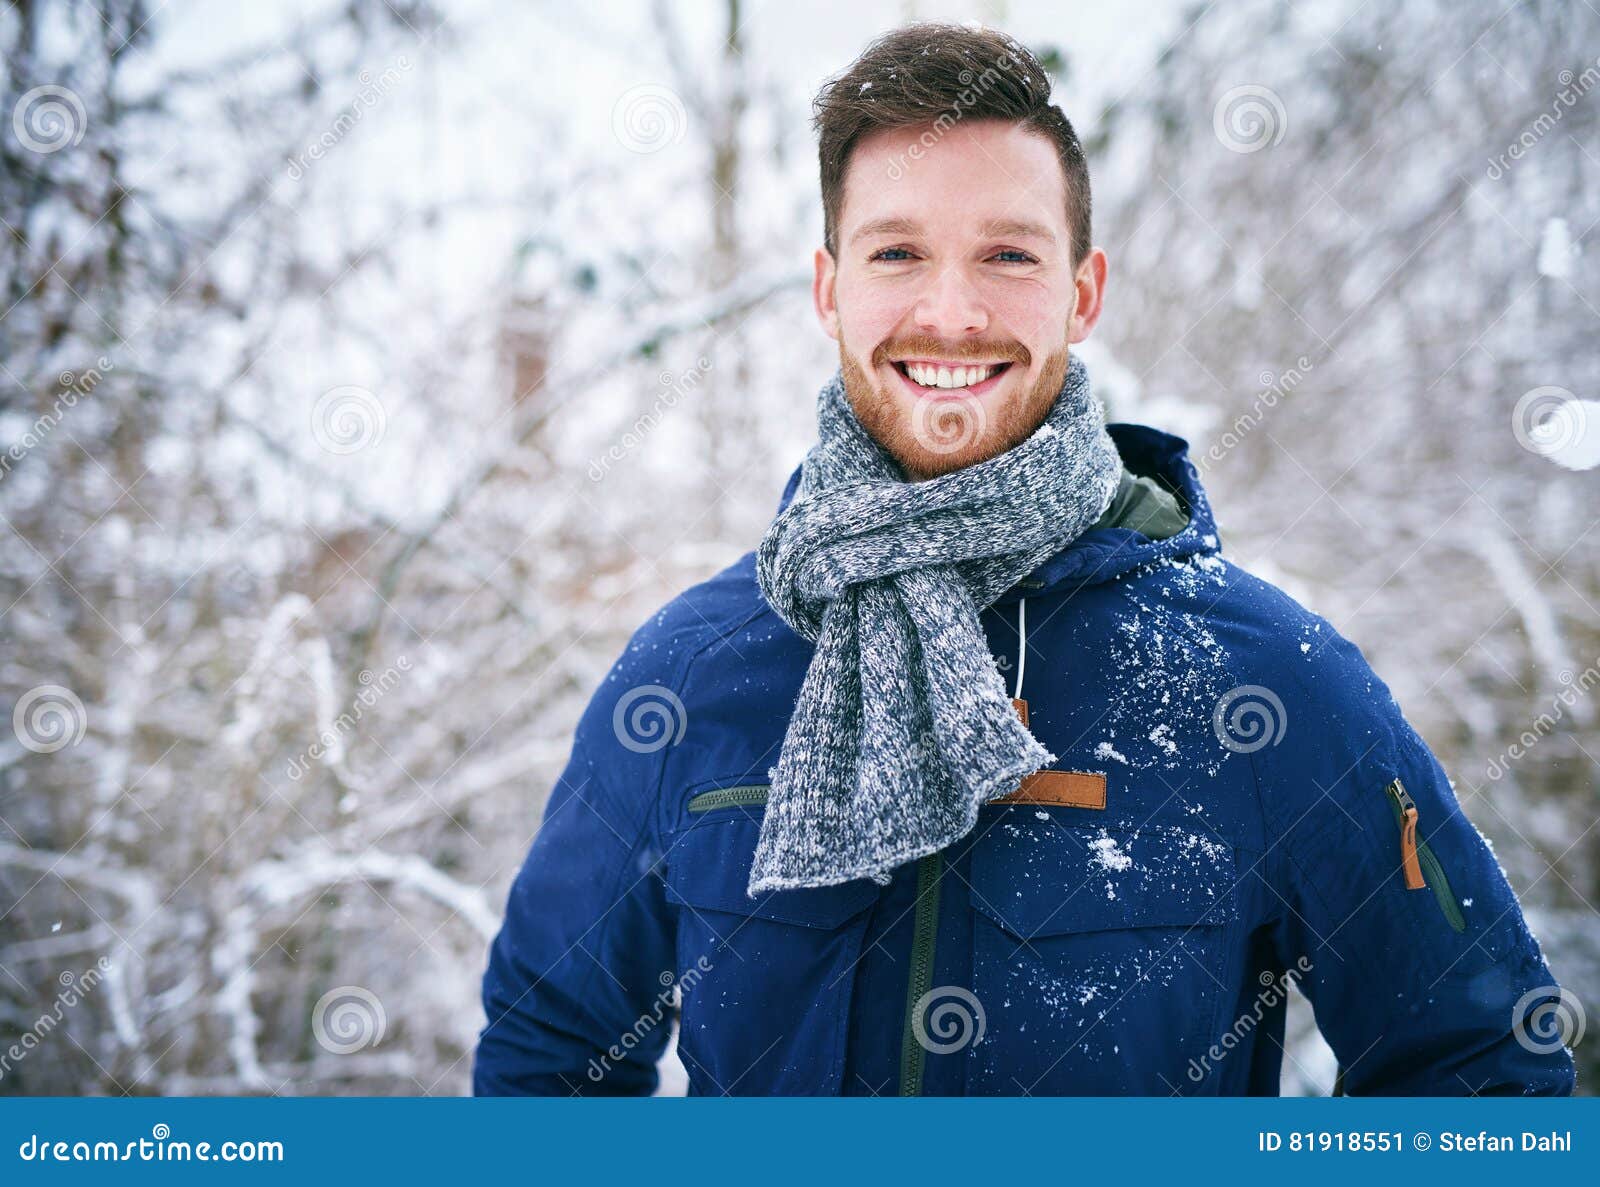 Young Man in Coat Standing in Snowfall Stock Image - Image of looking ...